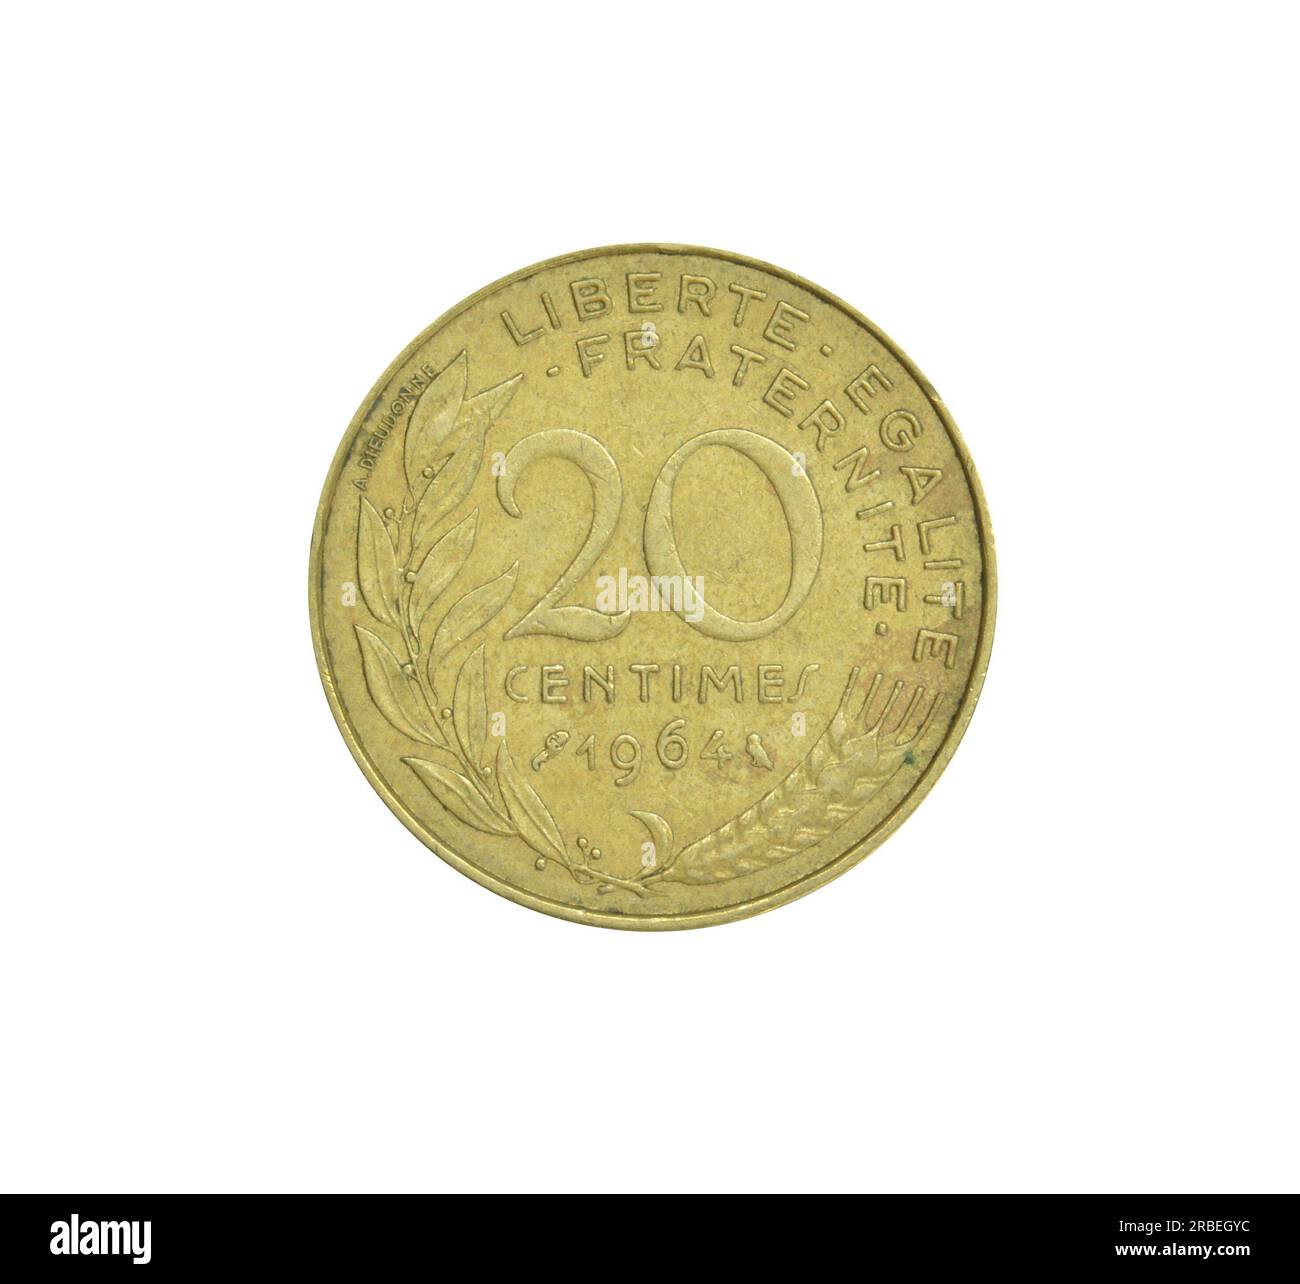 20 Centimes coin made by France in 1964, that shows Numeral value Stock Photo